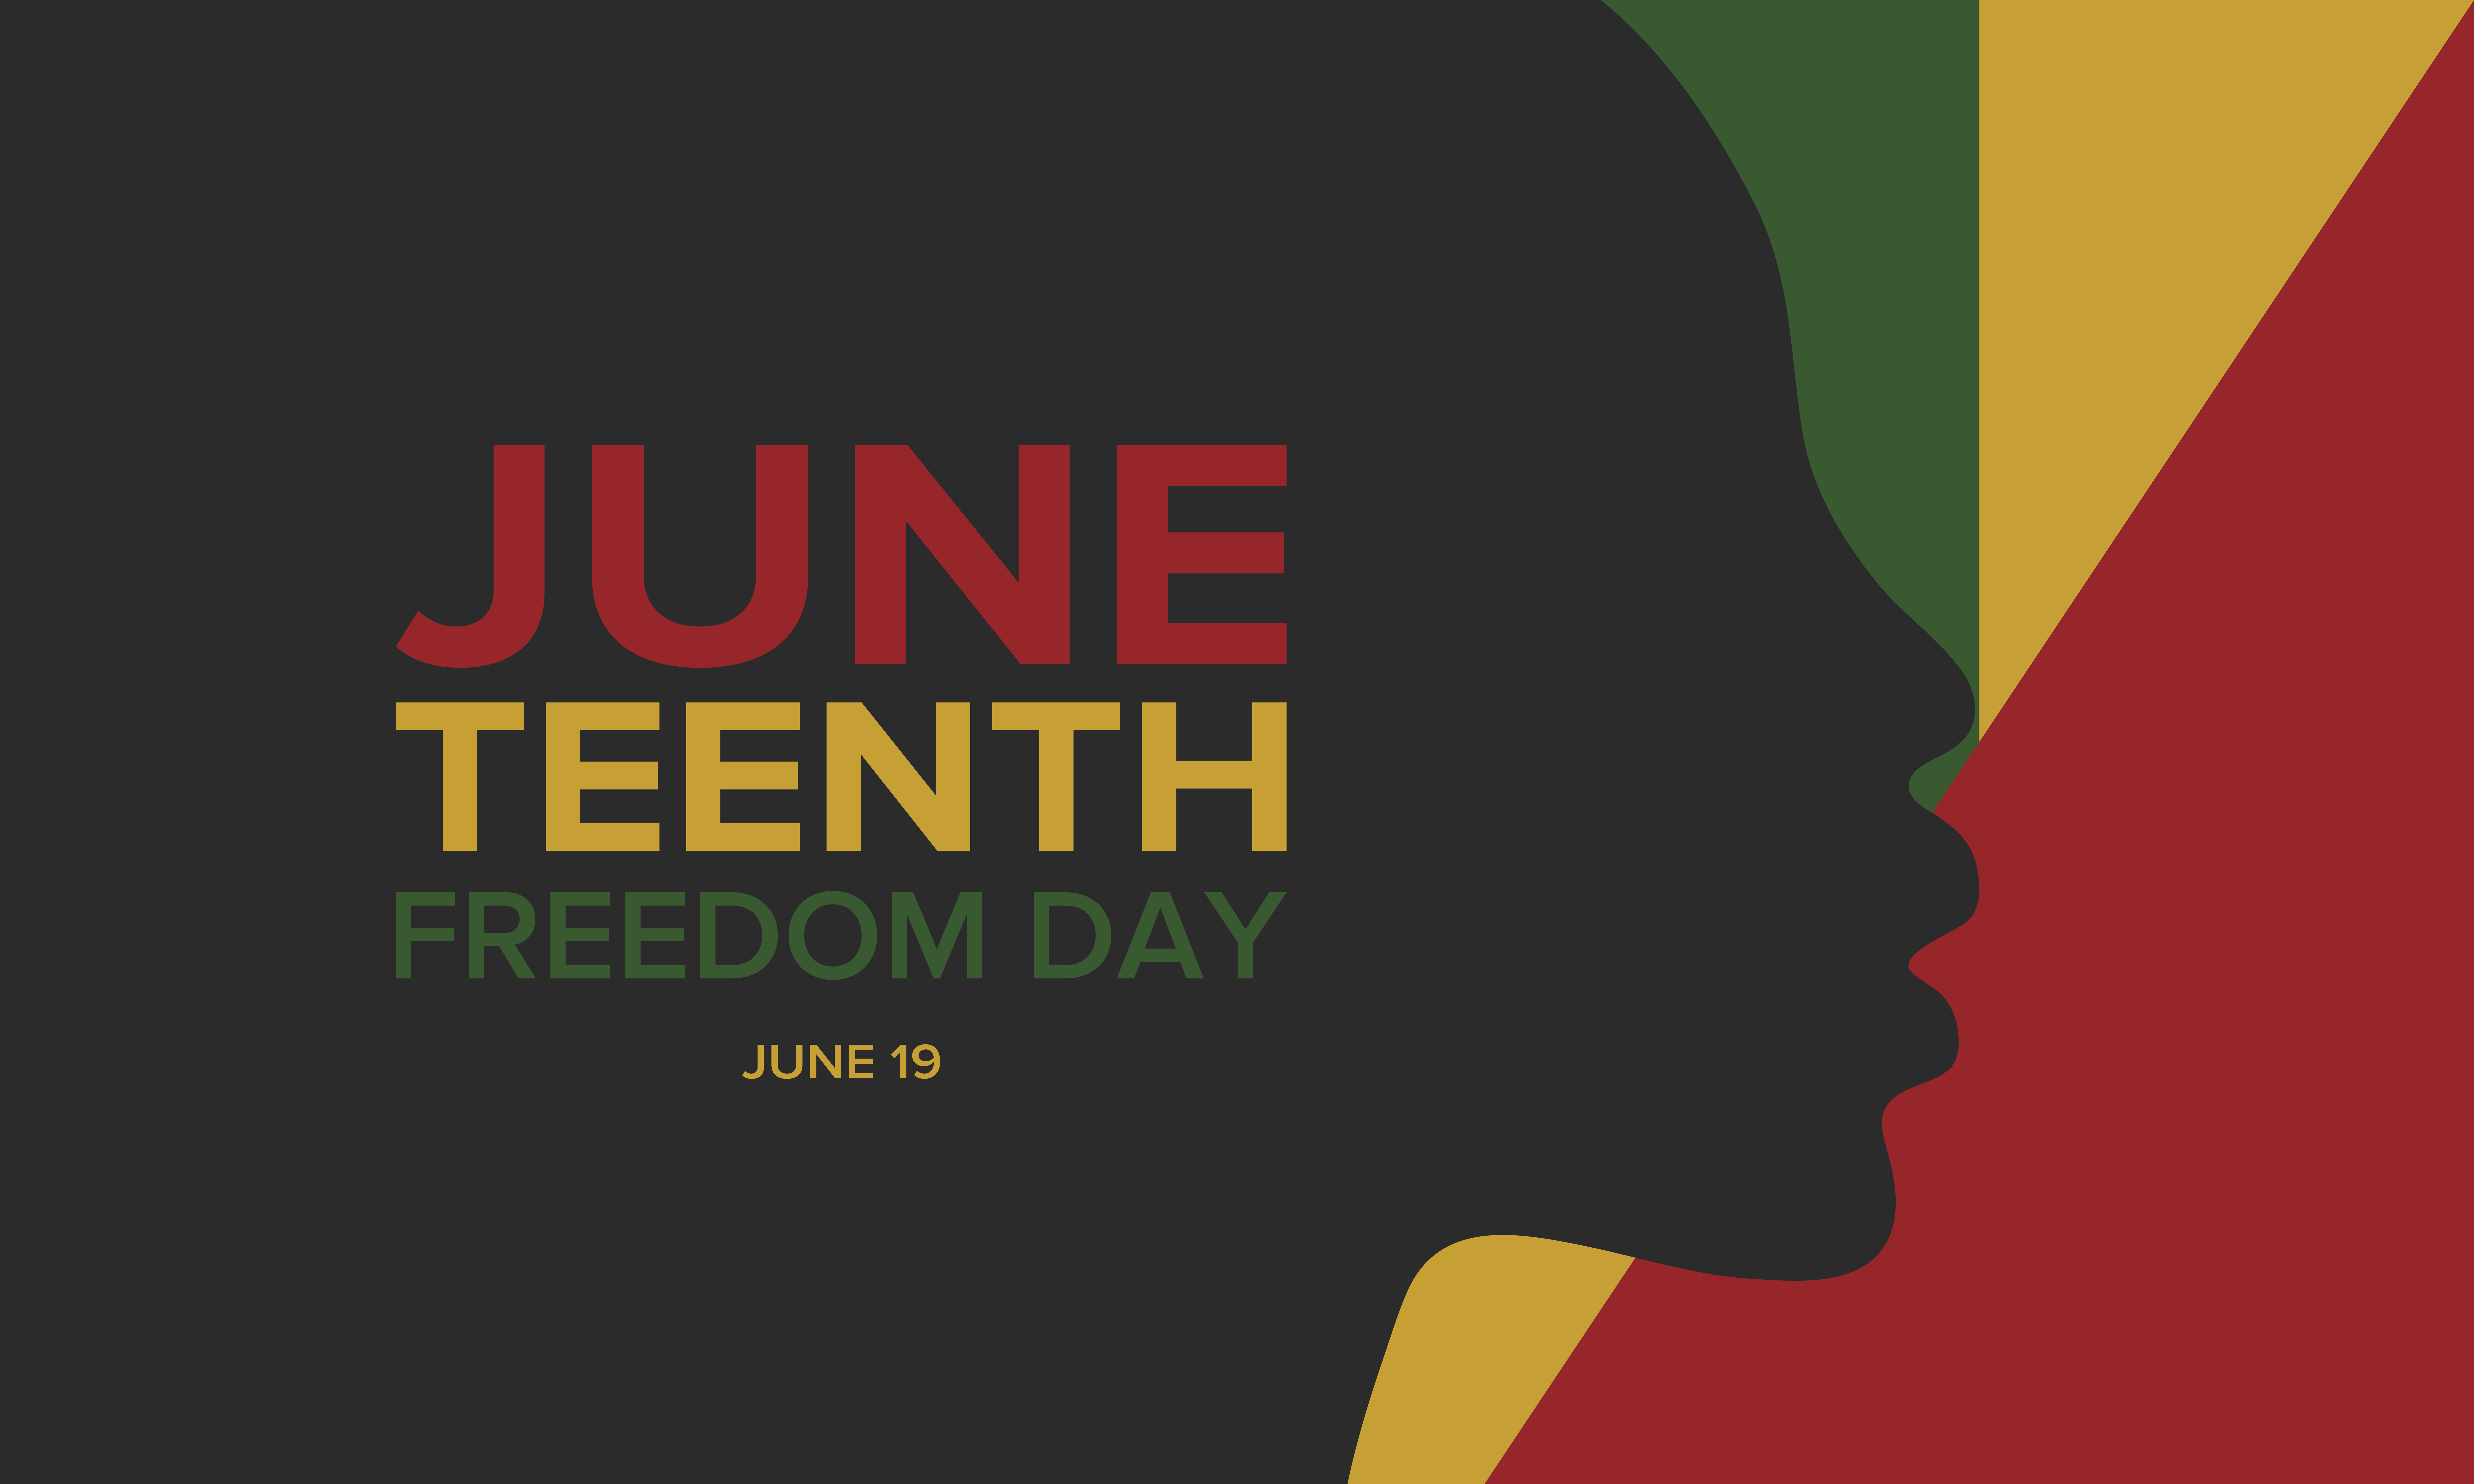 Juneteenth 2021: America Celebrates Freedom and Equality for All